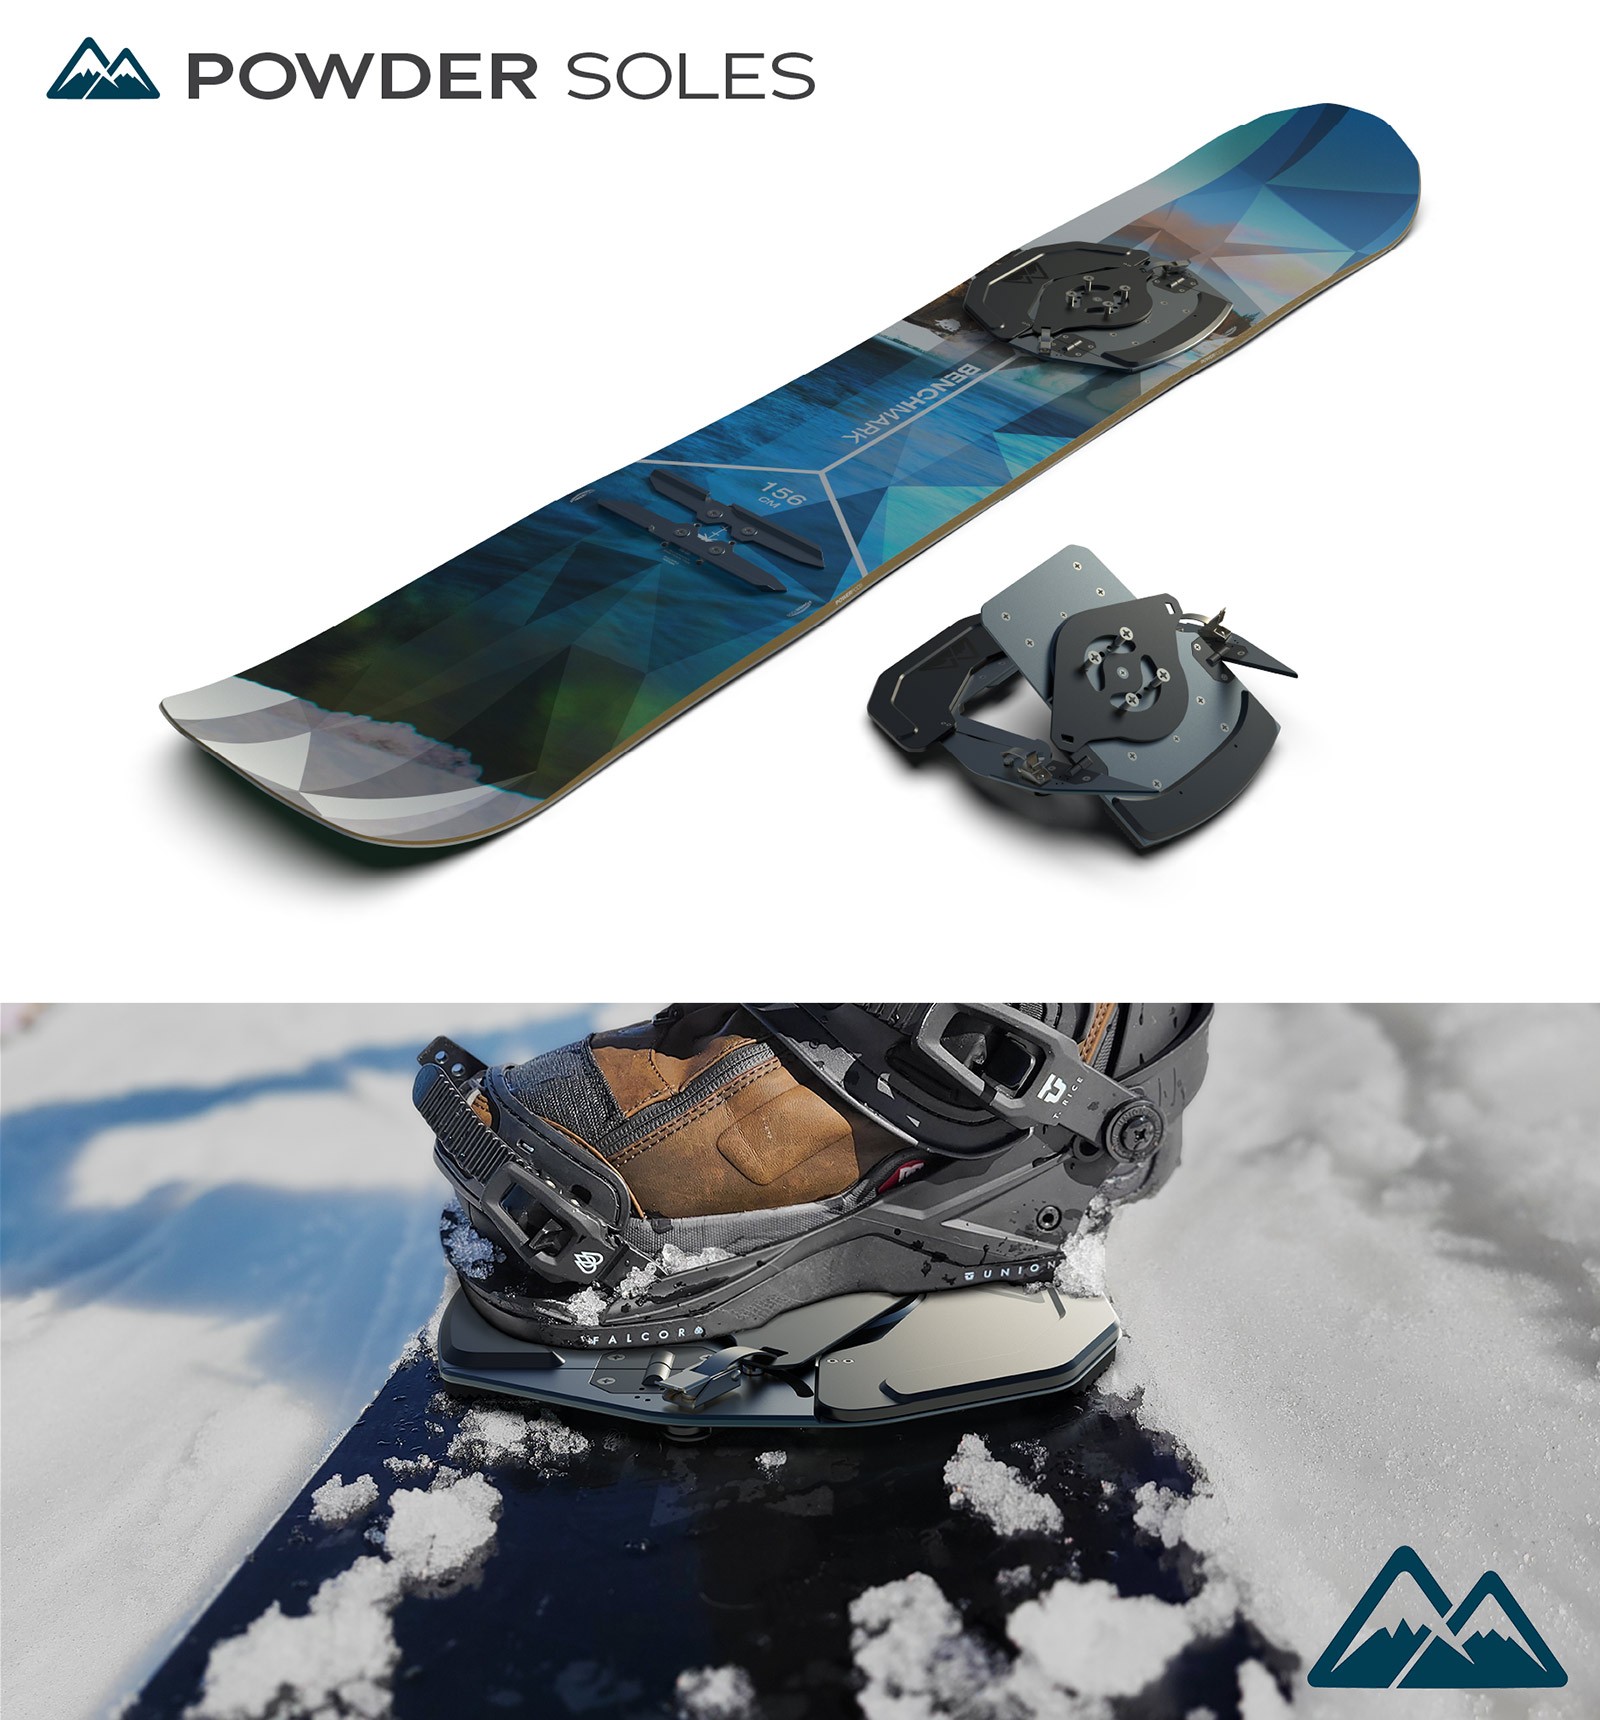 Powder Soles promotional photos from USU's Jayson Boren and Tate Floyd.